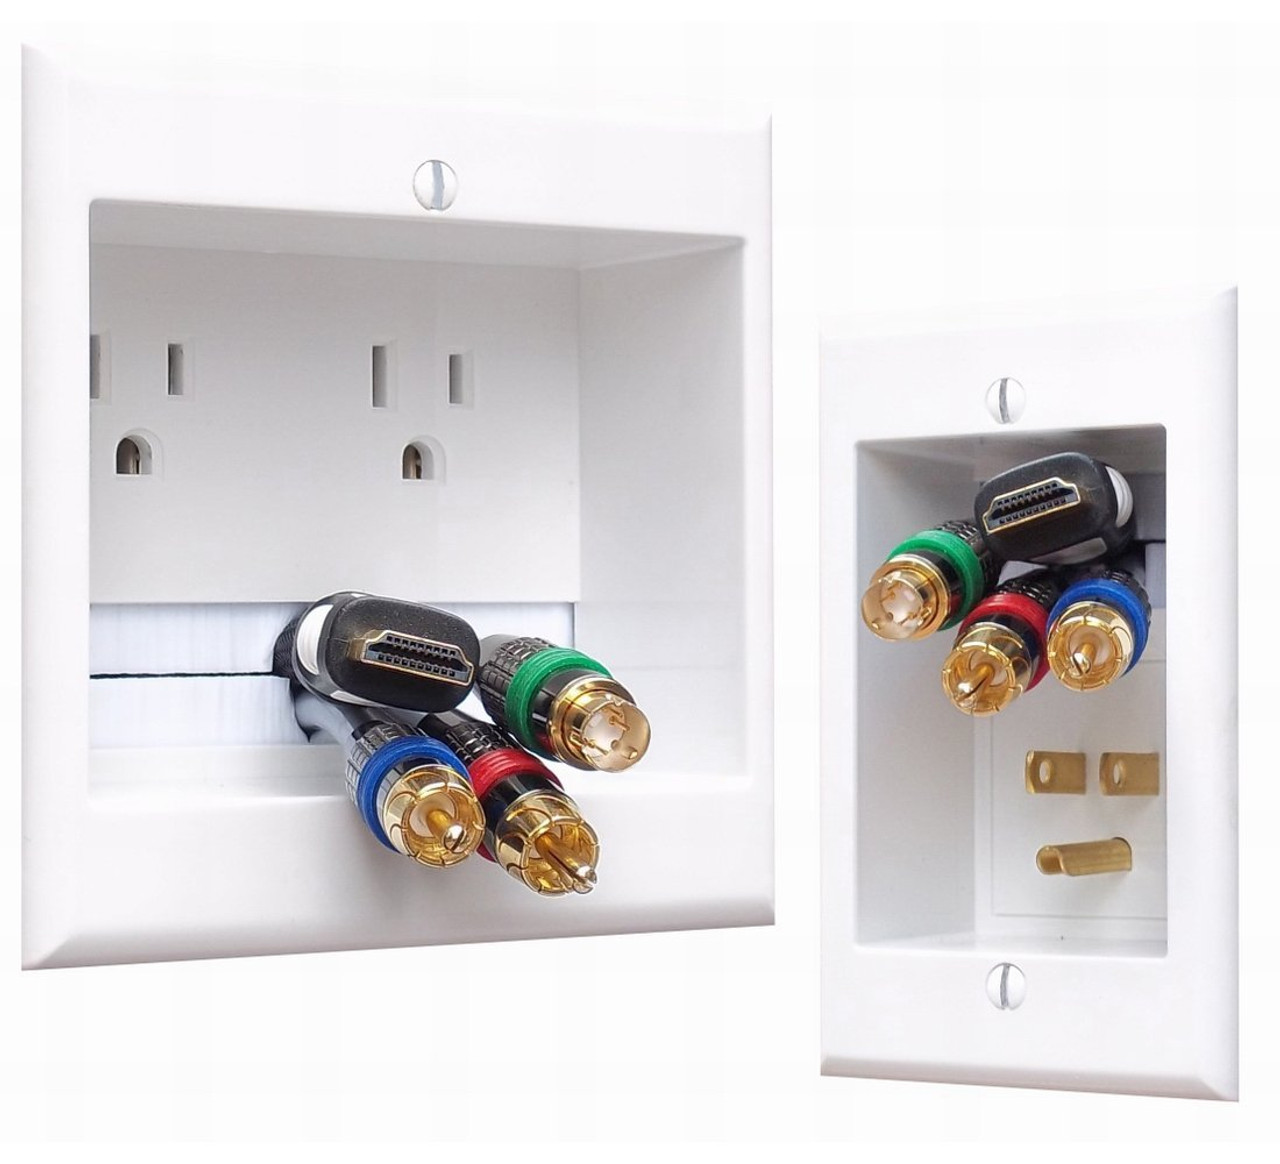 https://cdn11.bigcommerce.com/s-bd95c/images/stencil/1280x1280/products/2771/4307/PowerBridge_Solutions_TWO_PRO_Cable_Management_System_with_Dual_Power_for_Wall_Mounted_TVs_cables__51028.1393639982.jpg?c=2